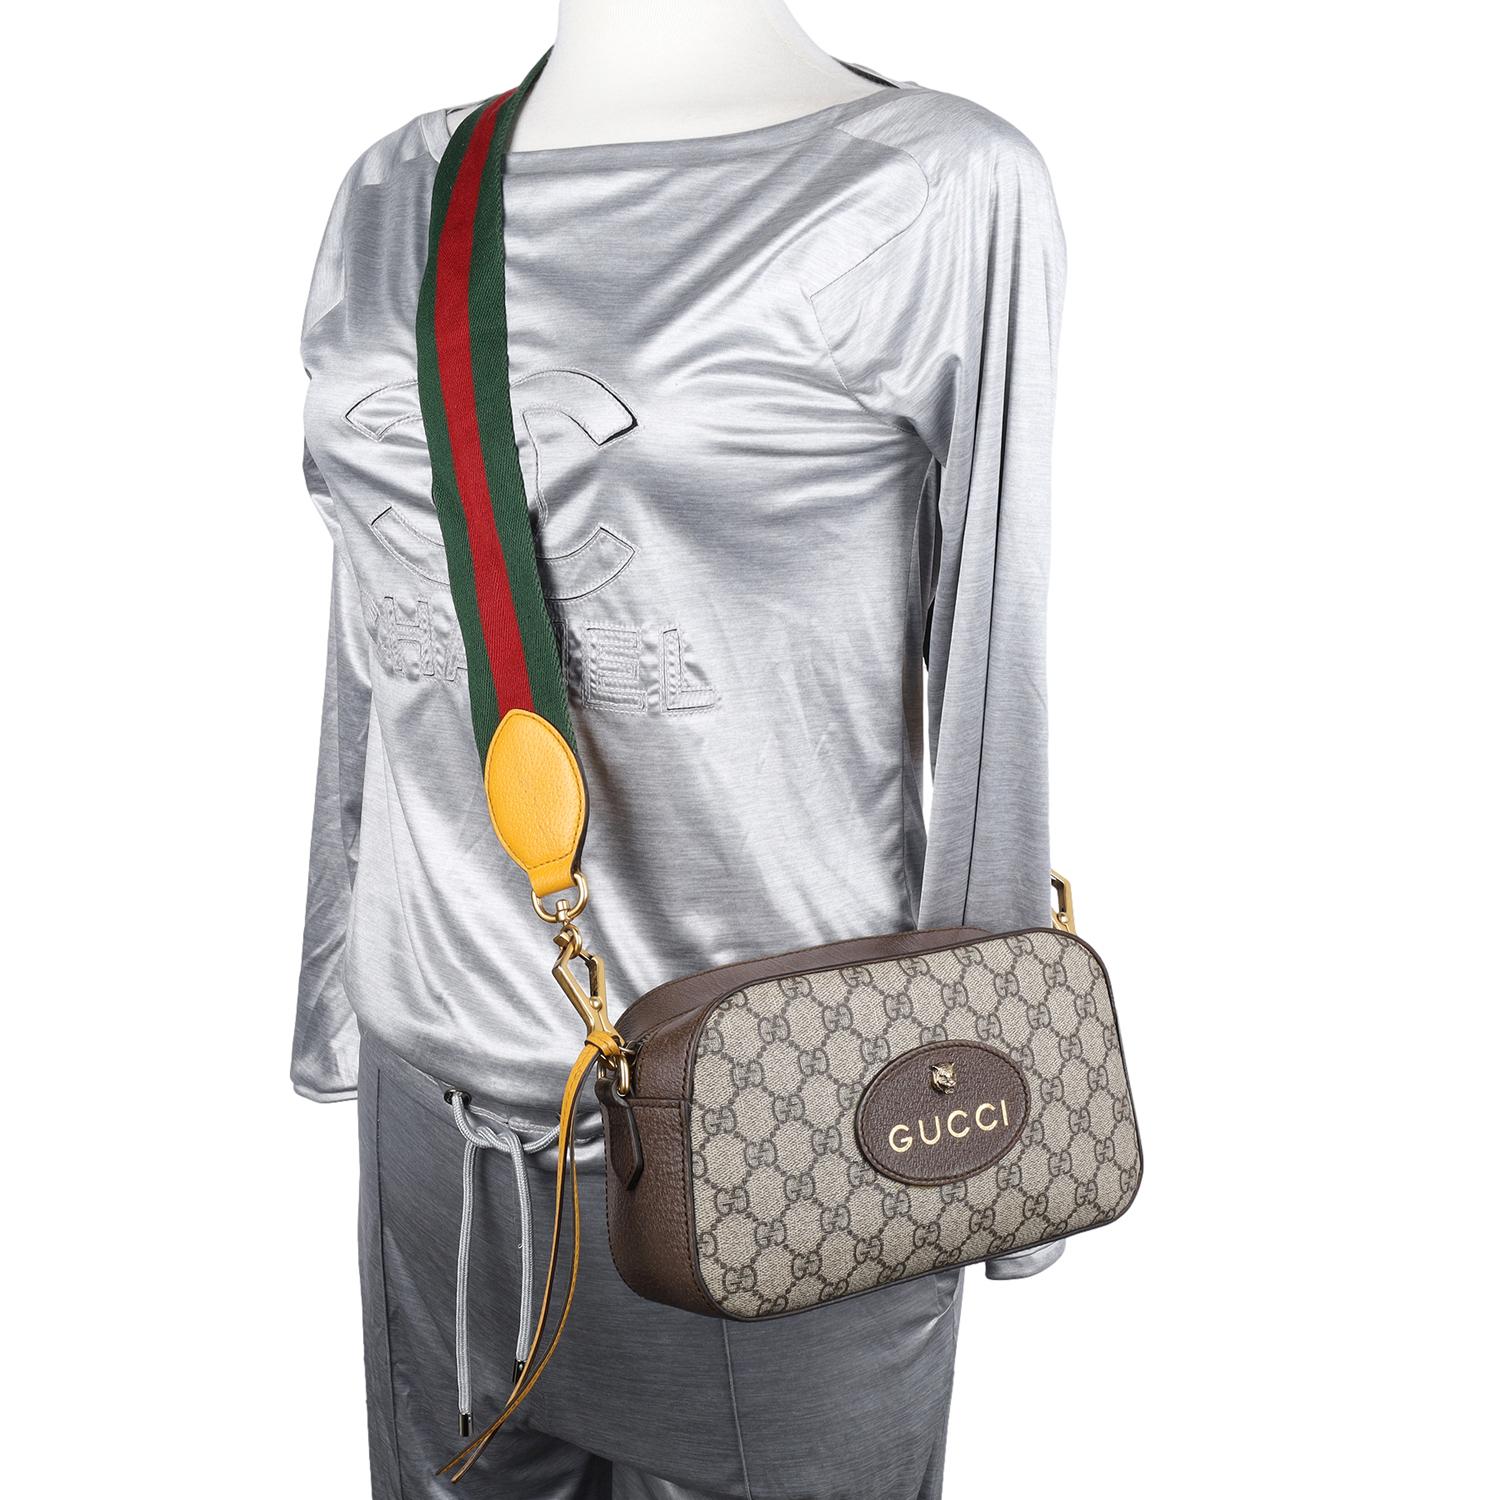 Authentic, pre-loved Gucci GG Supreme Monogram Neo Vintage crossbody bag. This chic Gucci web bag is a must-have for Gucci lovers. The roomy interior is ideal for everyday necessities or travel with the sophisticated style of Gucci. You won't want